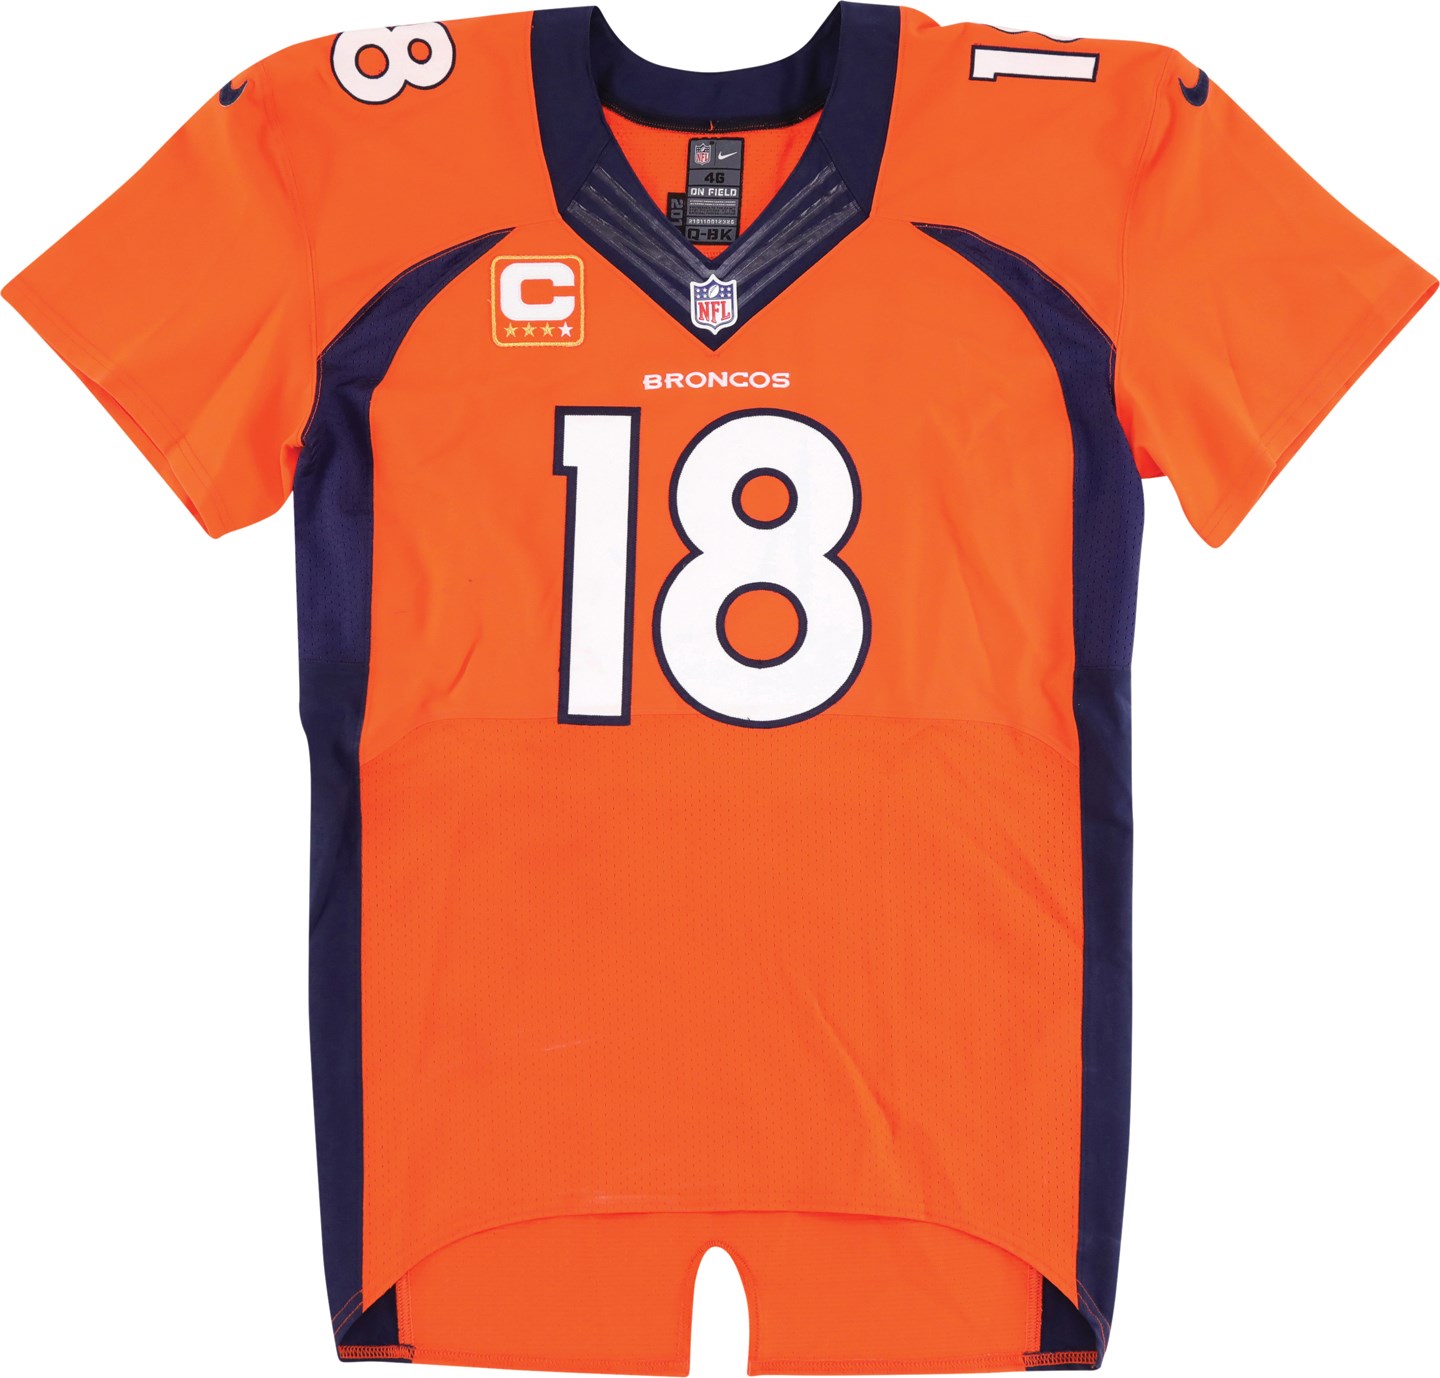 Football - storic 9/7/14 Peyton Manning Denver Broncos Game Worn Jersey - Surpasses 65,000 Passing Yards and Defeats All 32 NFL Teams (Davious Sports Photo-Matched LOA & Team LOA)